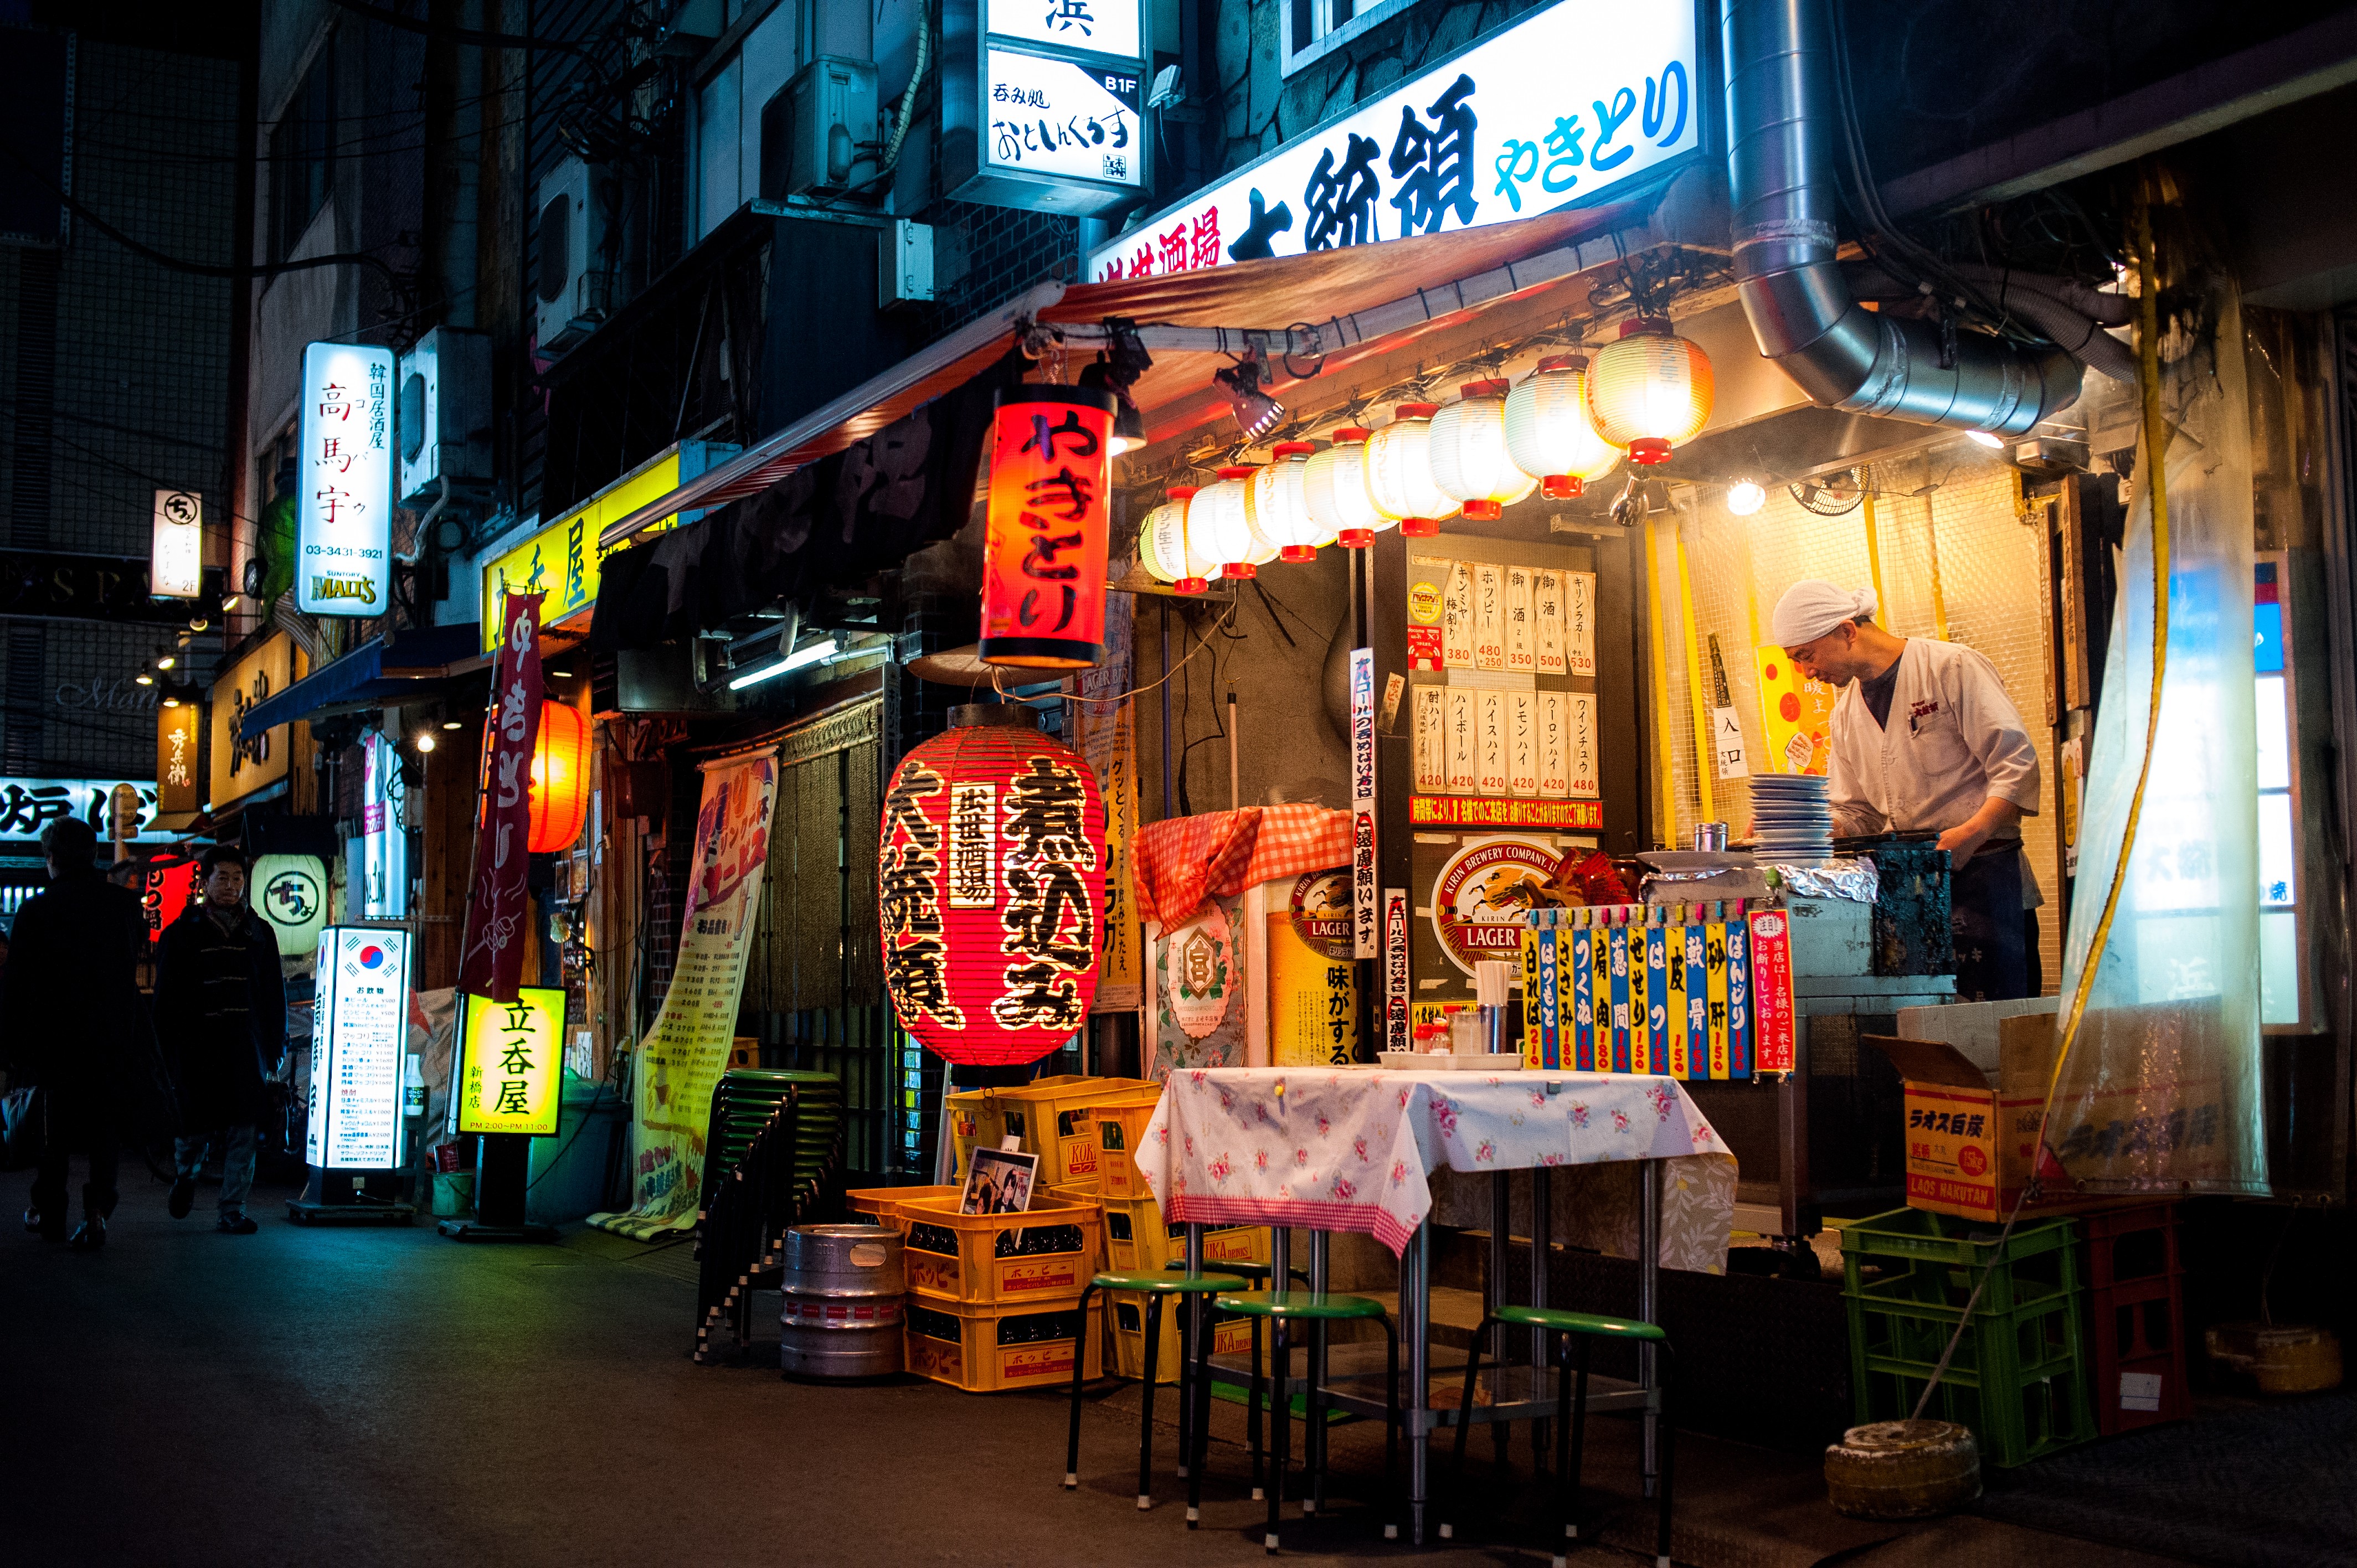 A yakitori chef works at his grill in a back street of Shinbashi district in Tokyo. Photo: Lukasz Palka